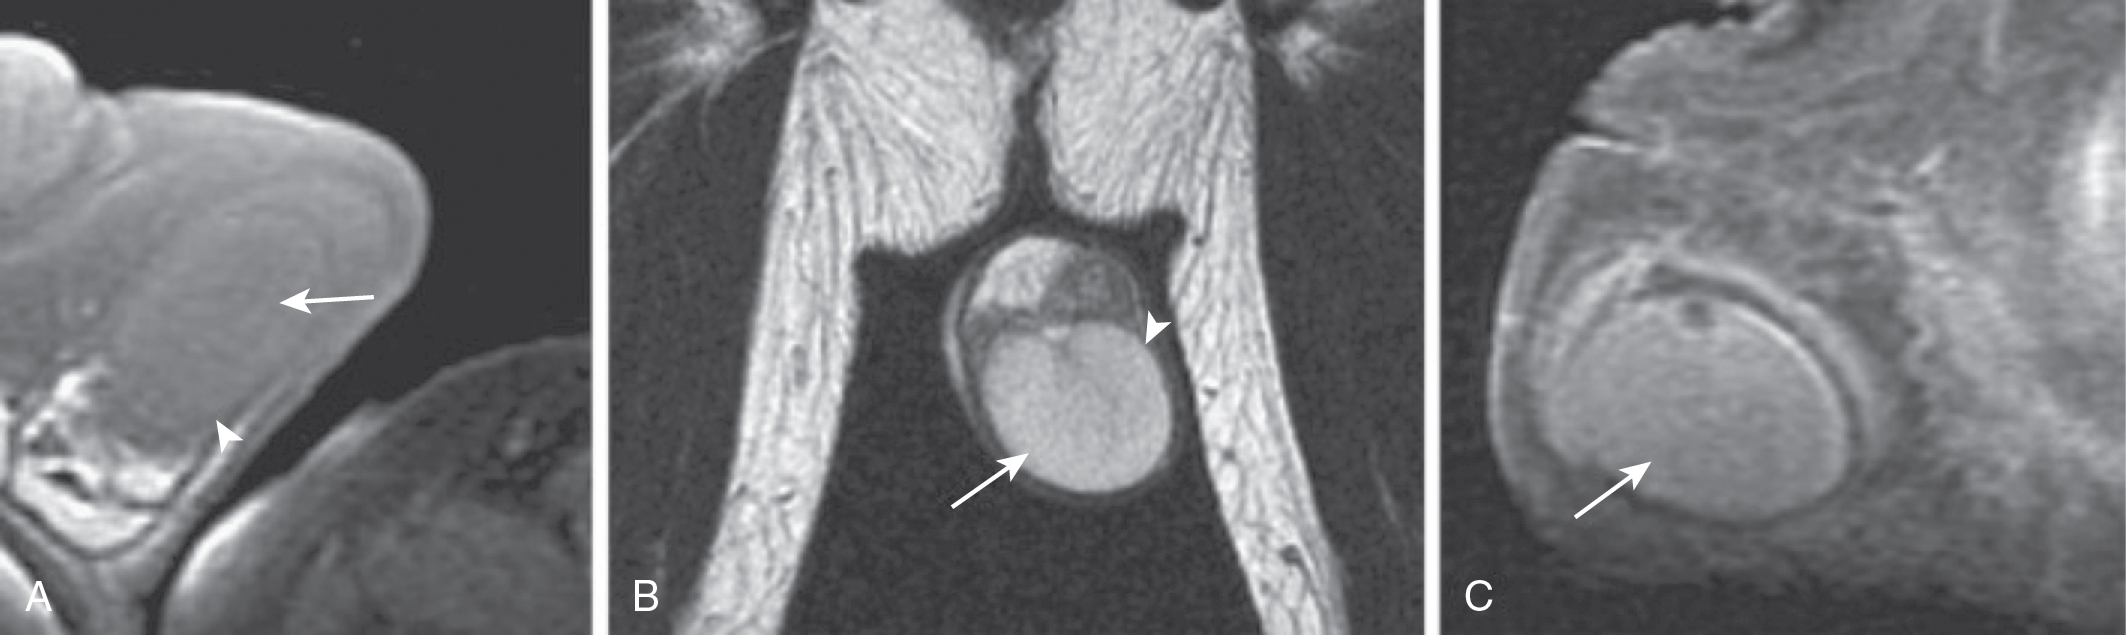 Fig. 30.2, Normal testis on magnetic resonance imaging. The normal testis appears homogeneous and isointense to muscle on T1-weighted image ( A: arrow ), with the tunica albuginea appearing hypointense ( A: arrowhead ); hyperintense on T2-weighted image ( B: arrow), with the tunica albuginea hypointense ( B: arrowhead ); and homogeneously enhancement after administration of gadolinium ( C: arrow ).